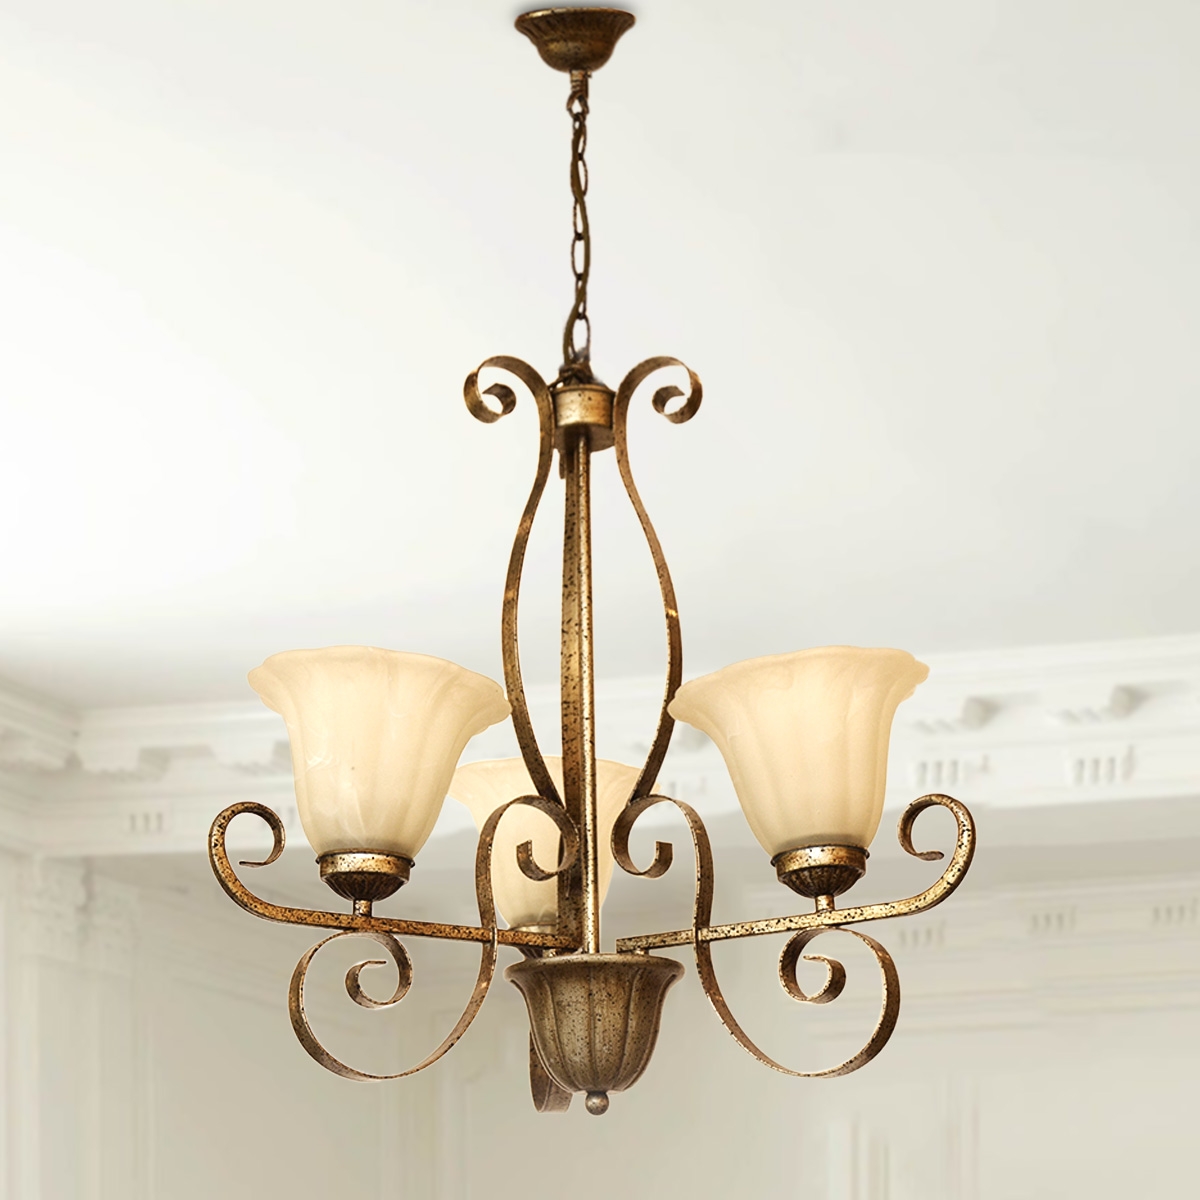 Uplight Chandelier 3 Arms  HLH-24108- Brass